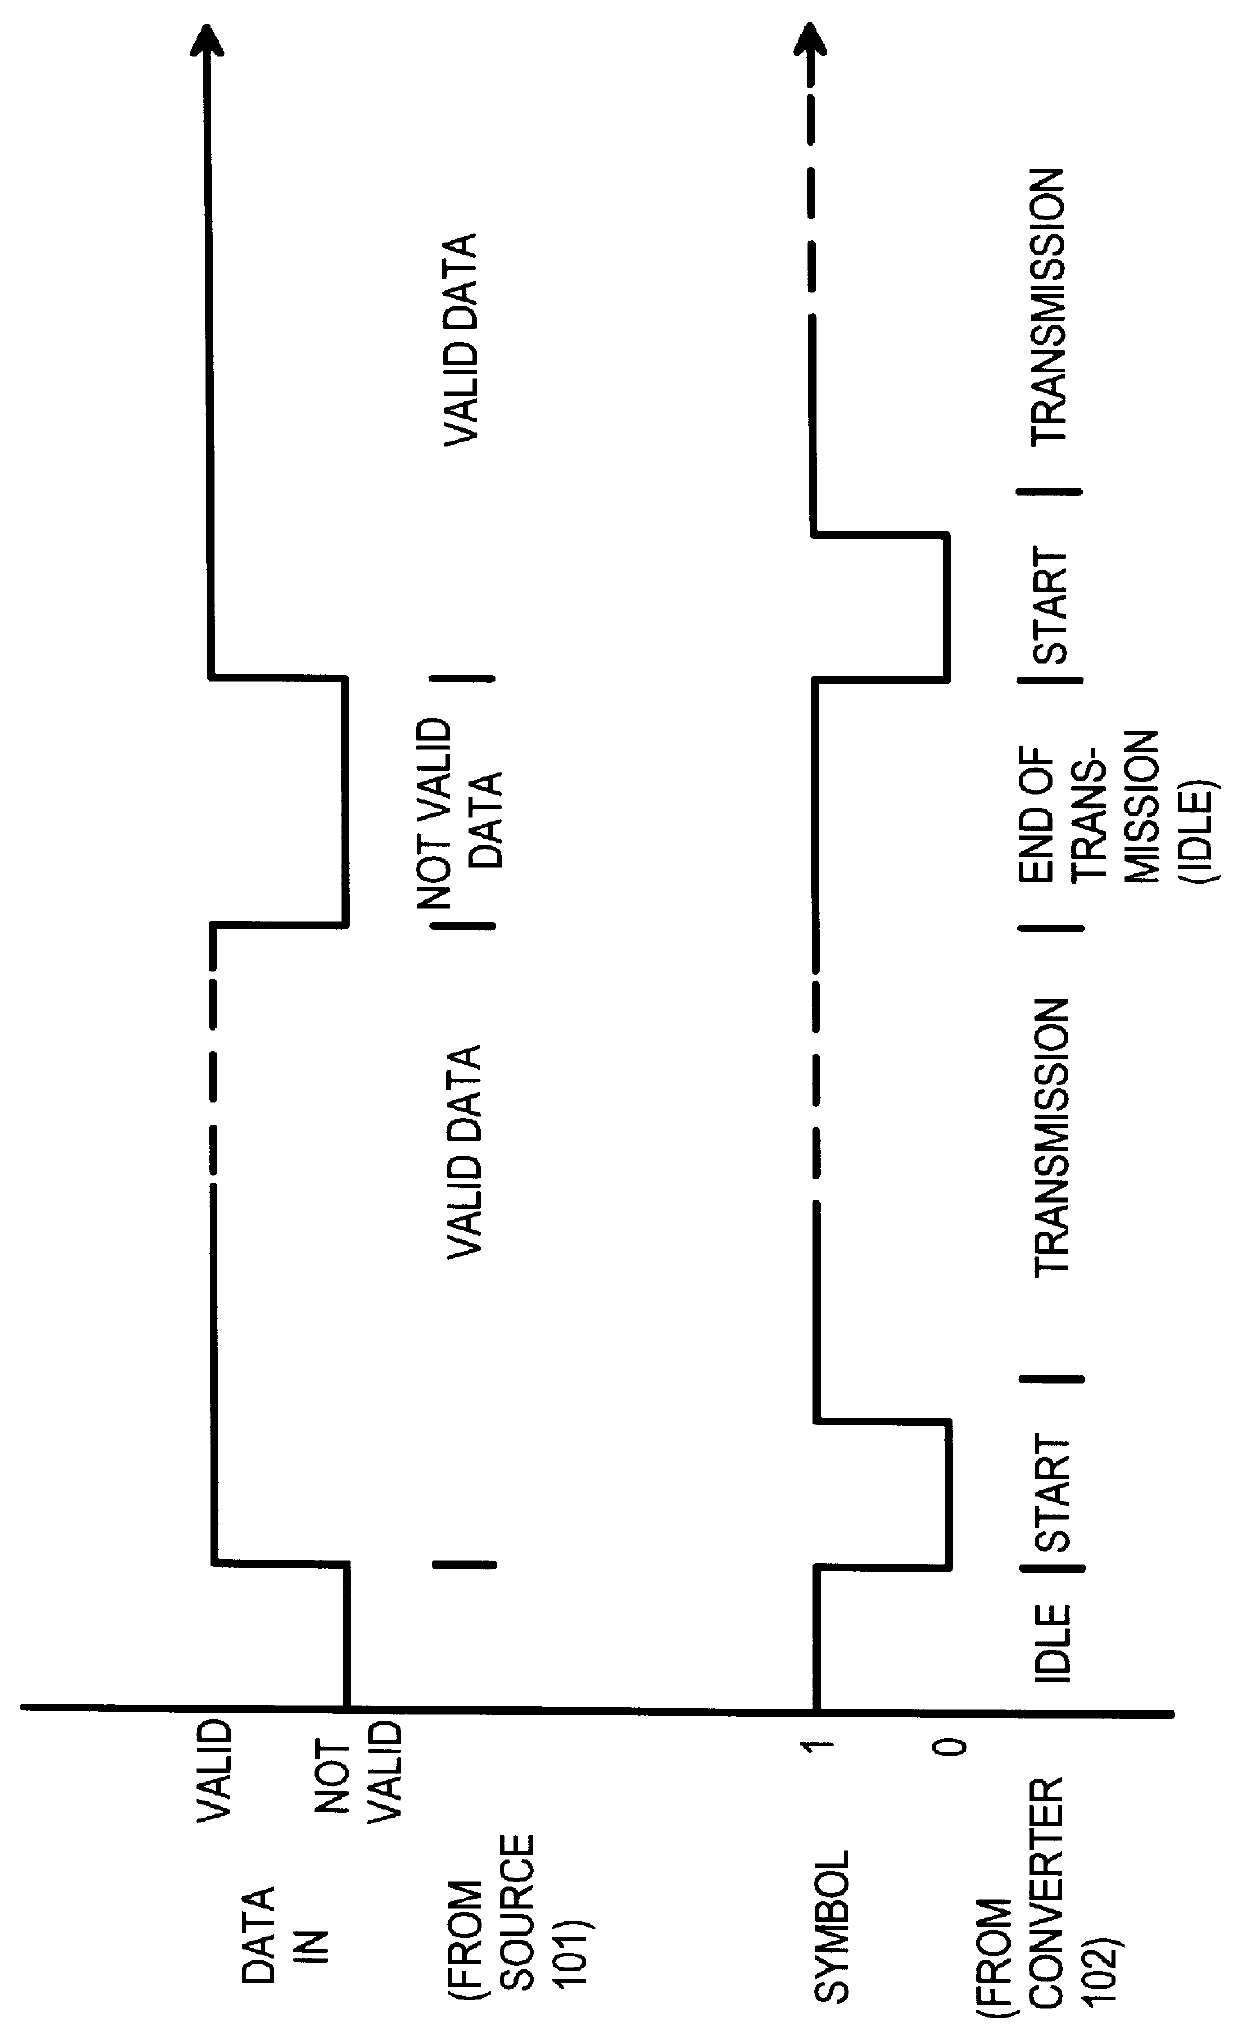 Hybrid interface for packet data switching